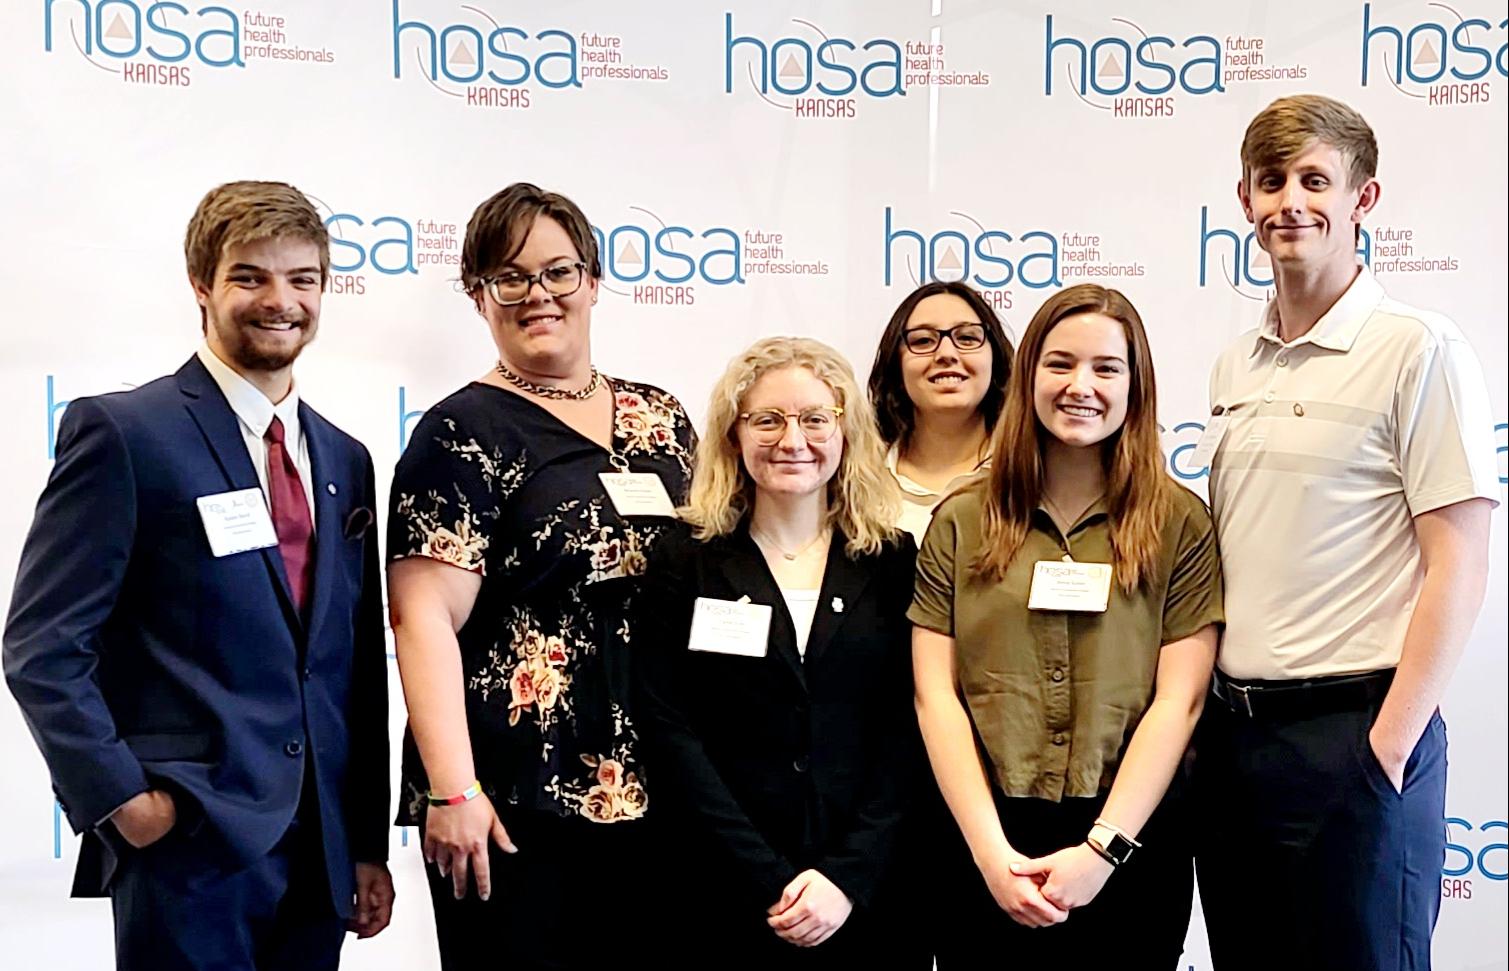 group of students standing in front of a HOSA backdrop